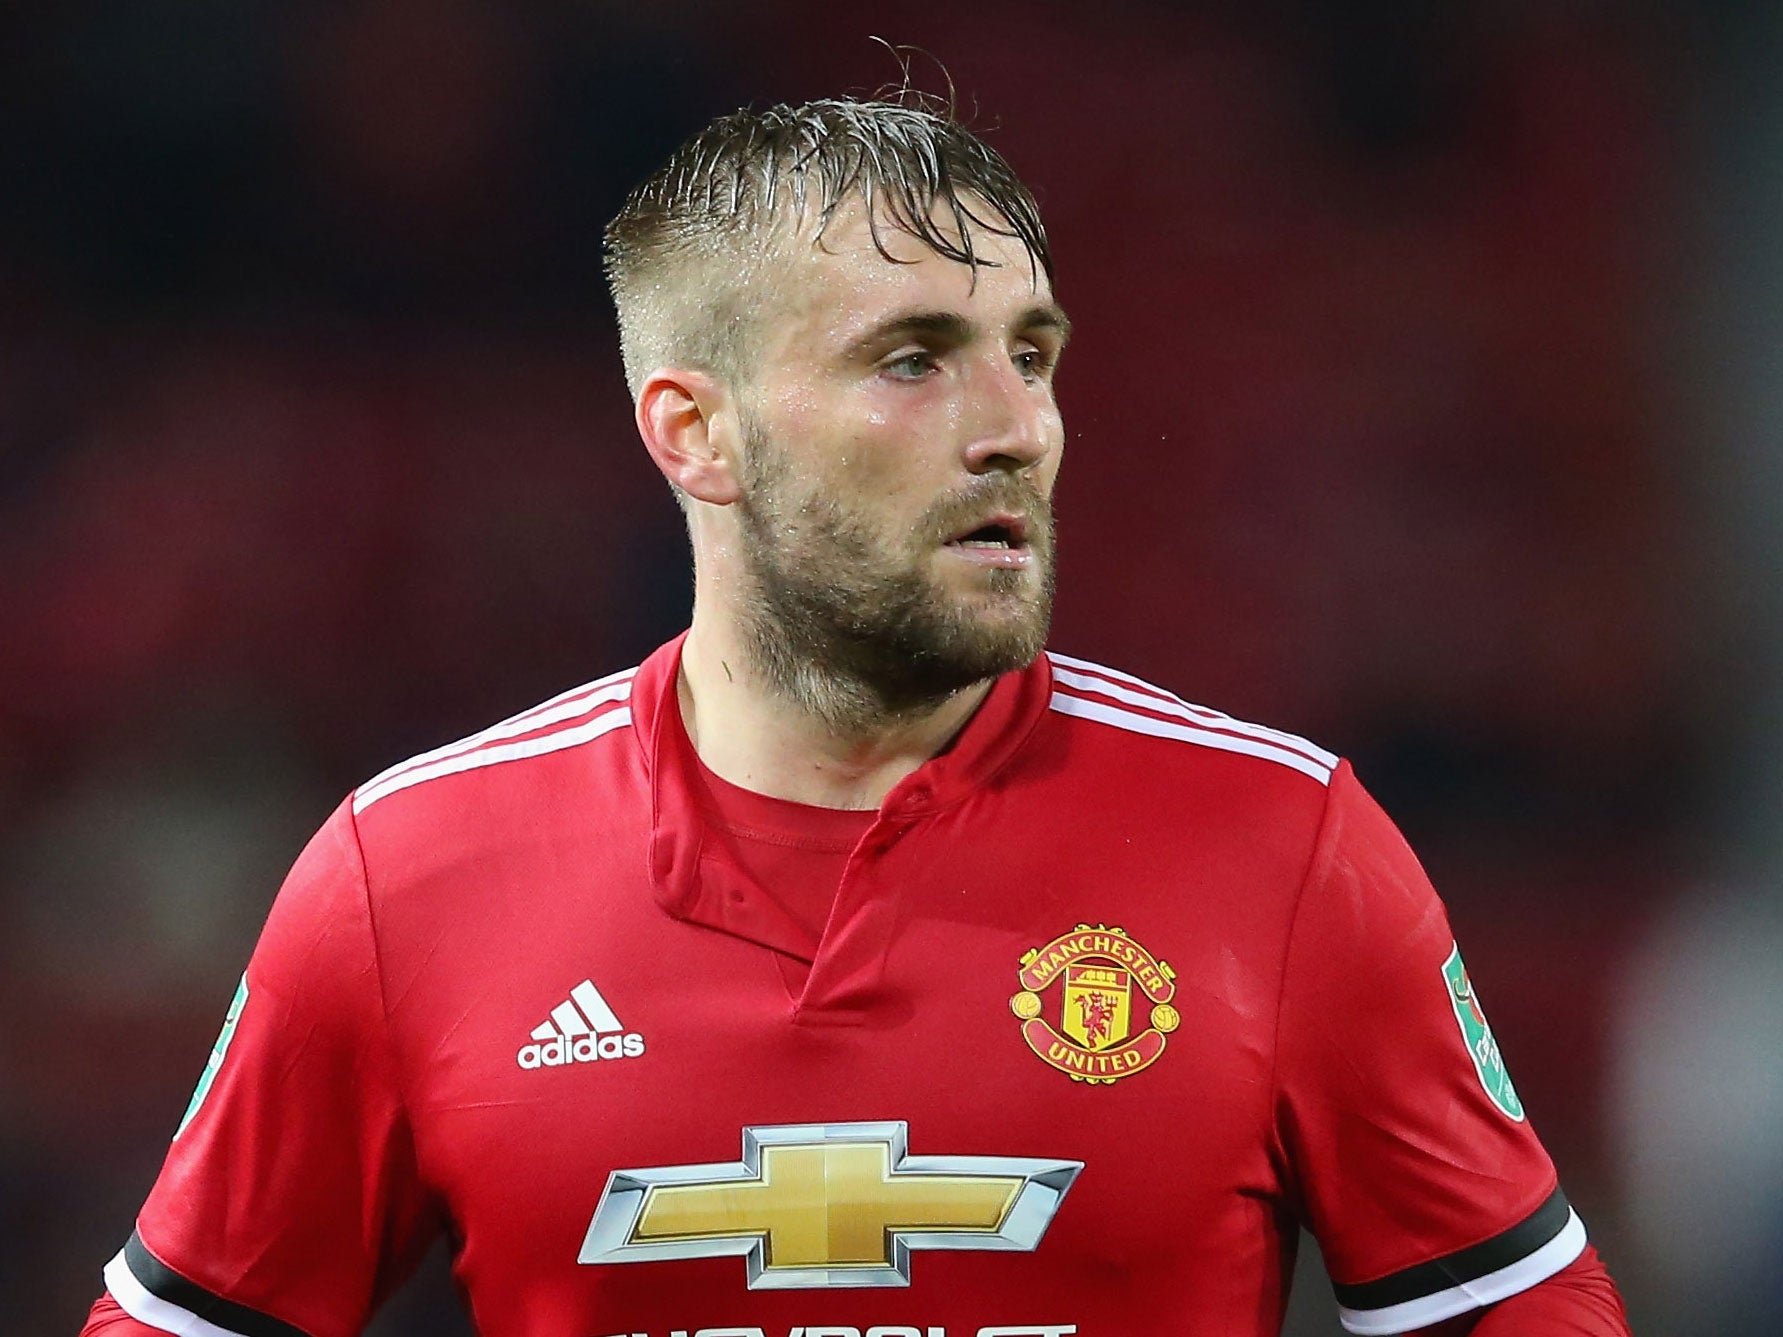 Luke Shaw made his first appearance since late April on Wednesday night